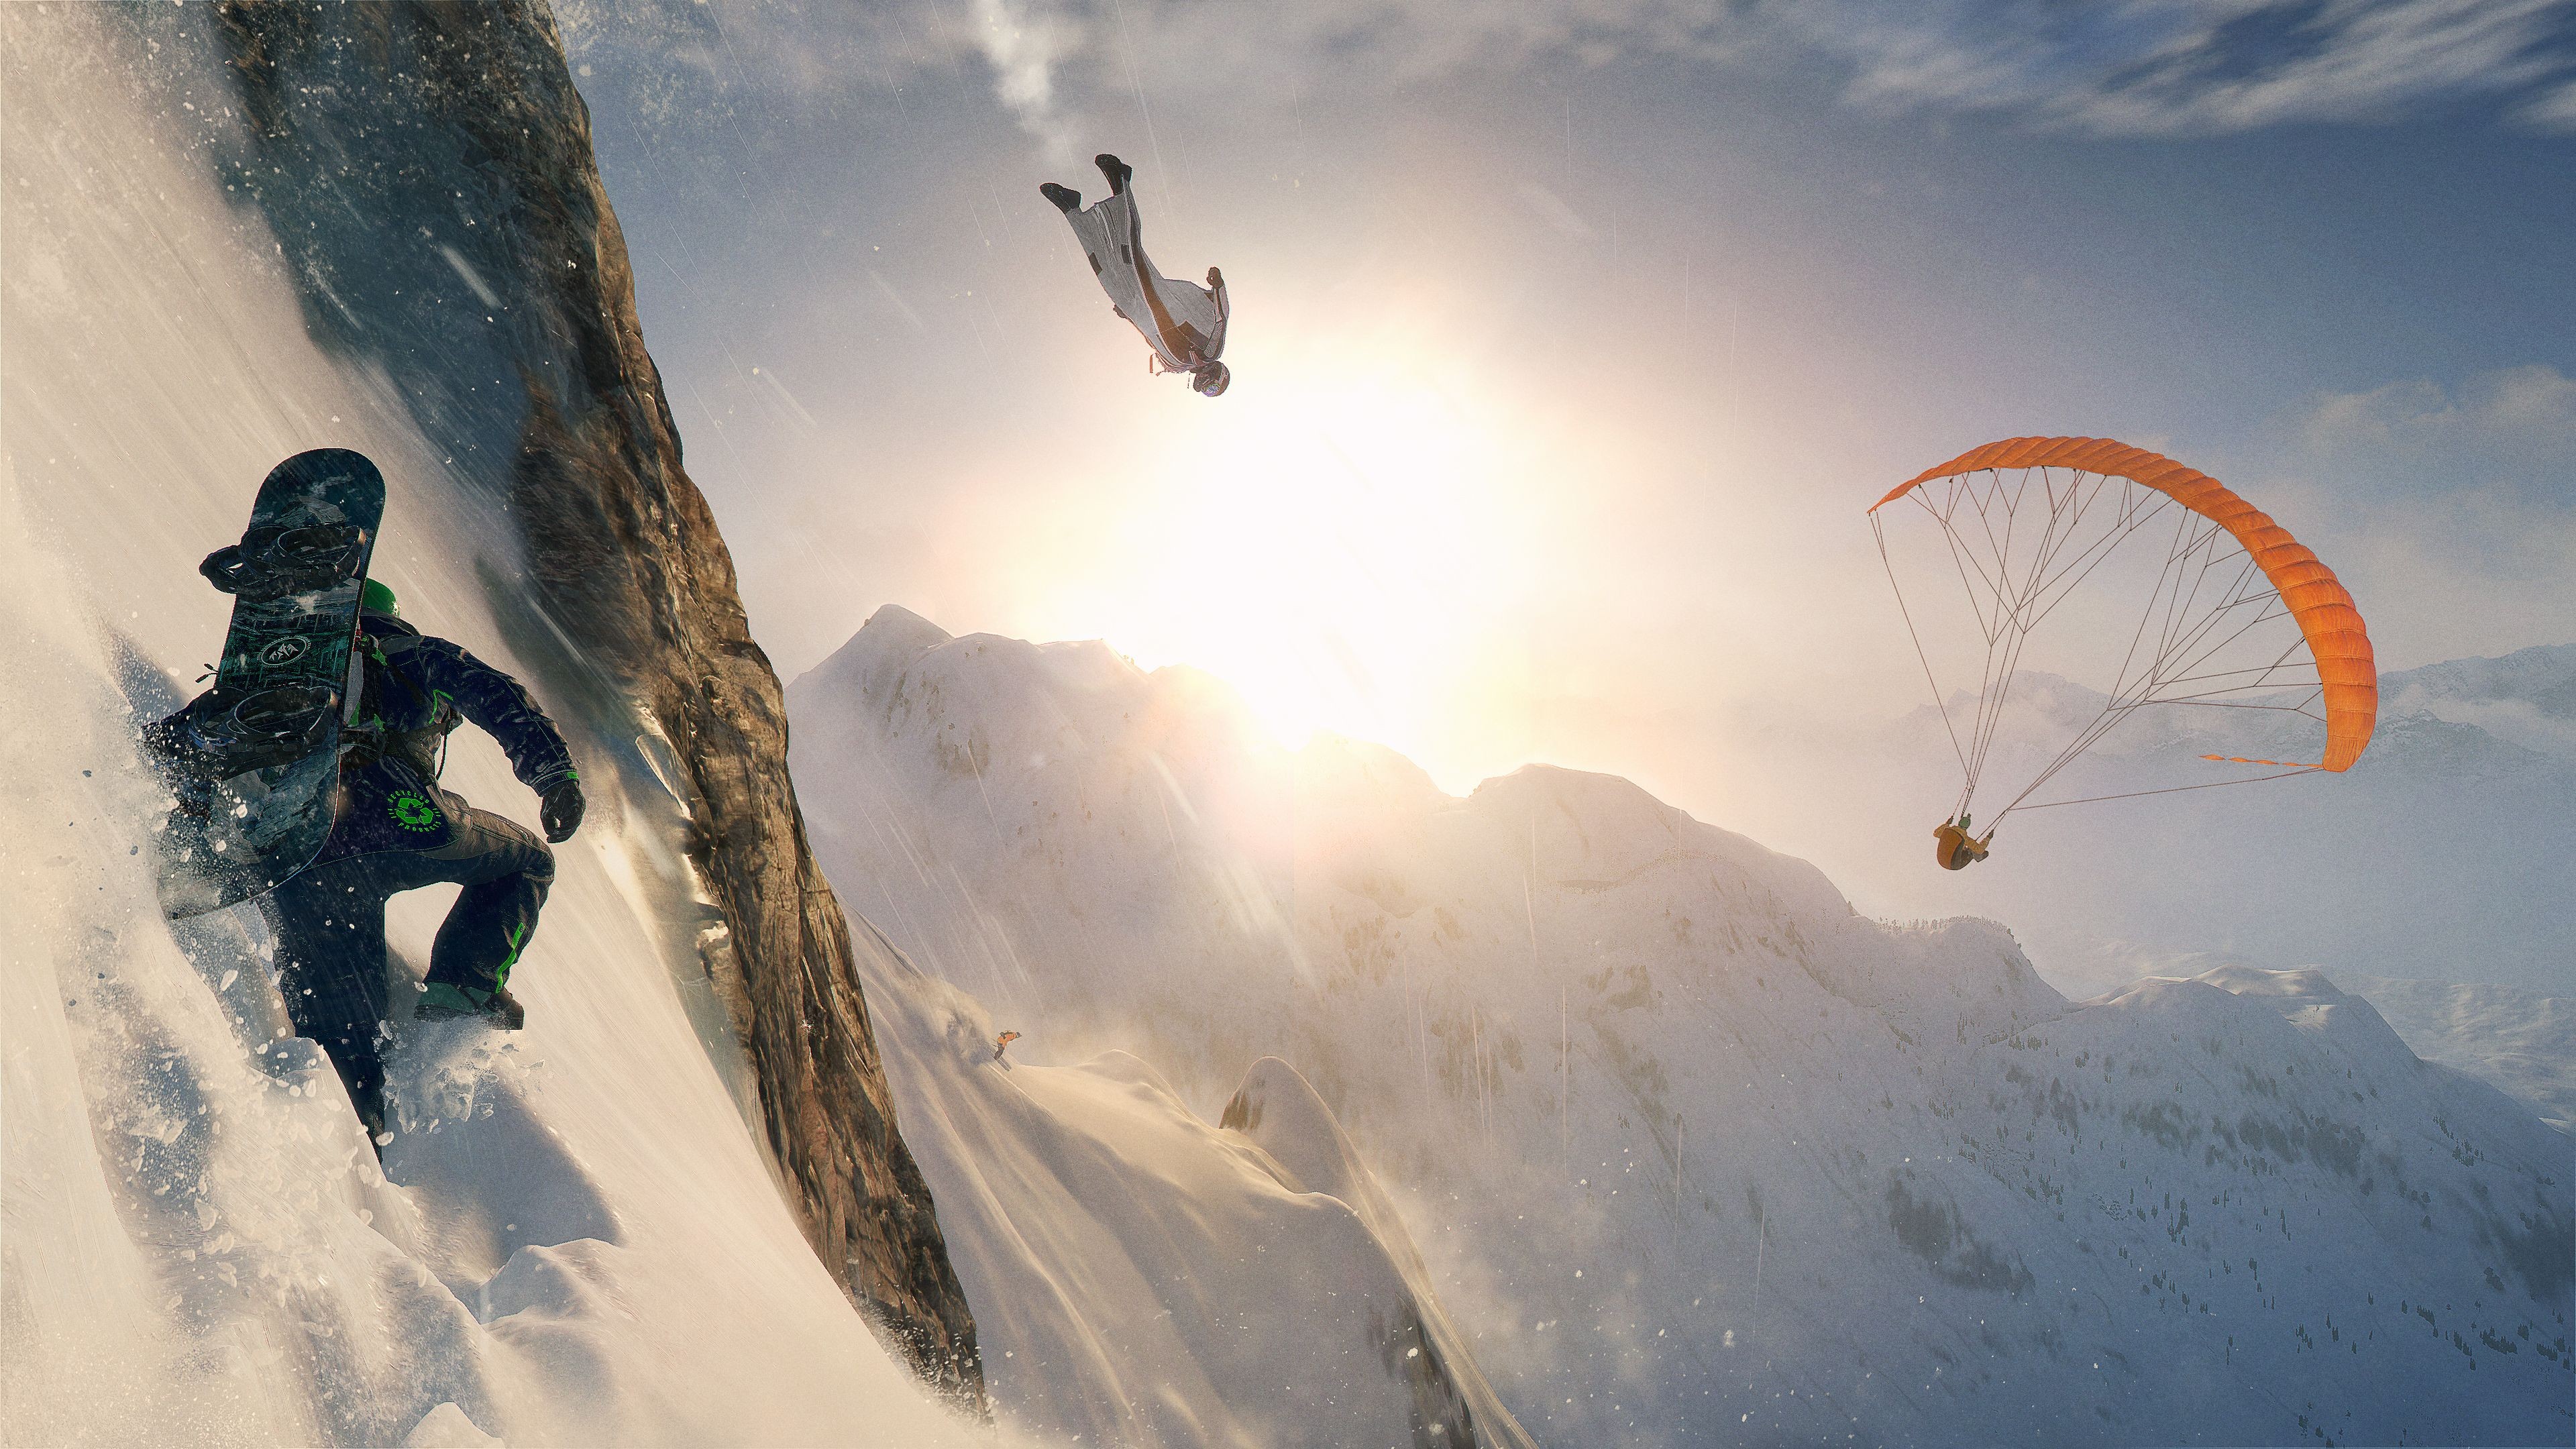 skydiver, Men, Video games, Steep, Mountains, Snow, Sun, Parachutes, Skydiving, Snowboards, Clouds, Wingsuit, Ubisoft, Flying, Paragliding Wallpaper